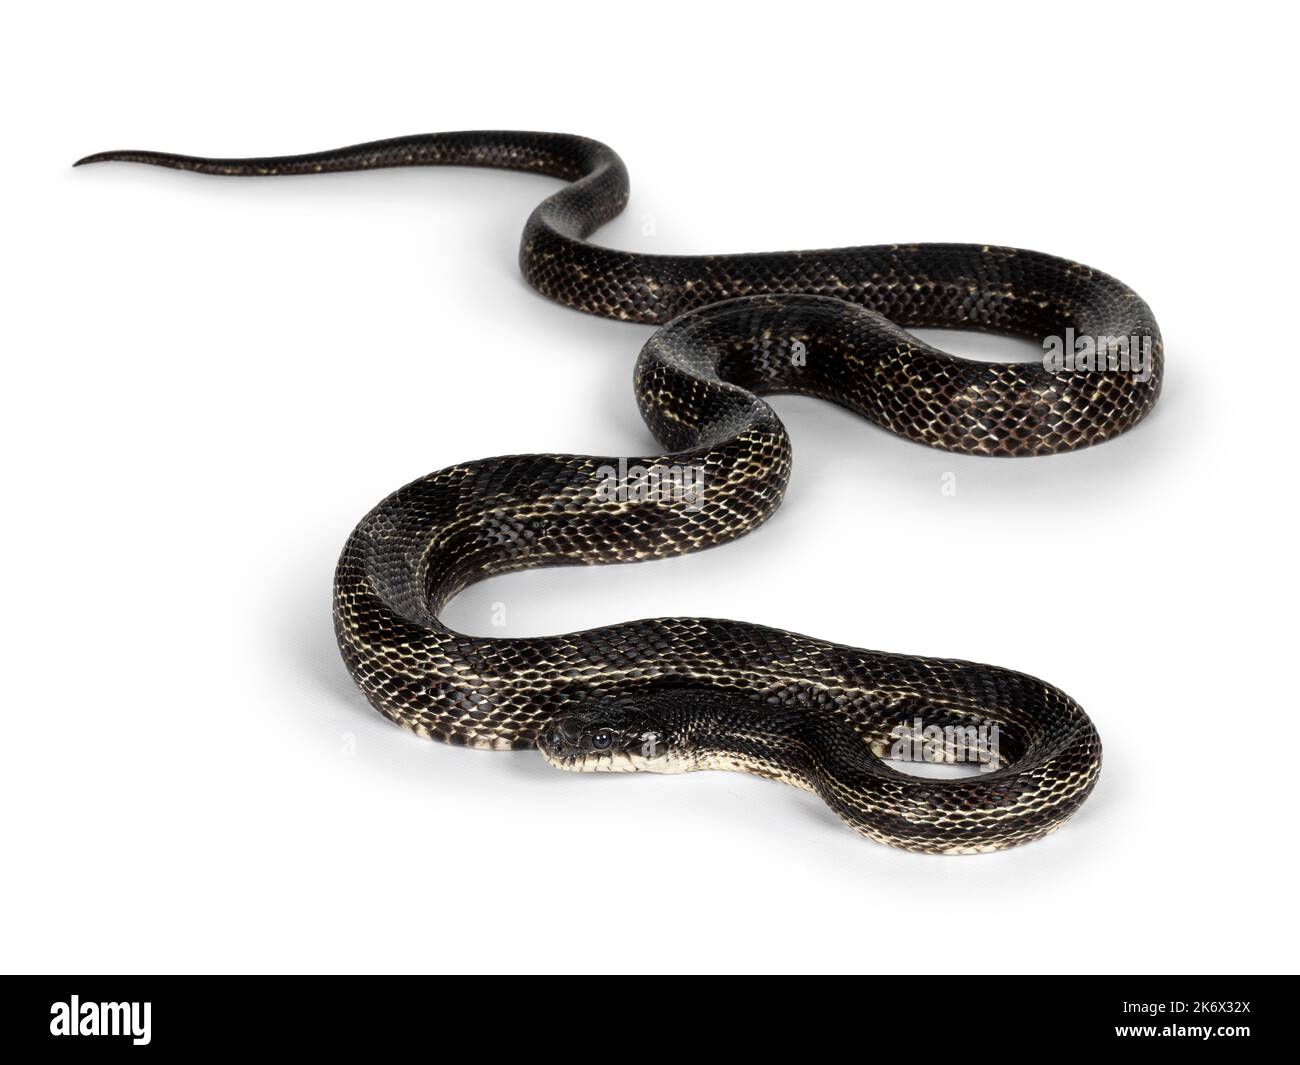 Full length image of a Black rat snake aka Pantherophis obsoletus. Isolated on a white background. Stock Photo